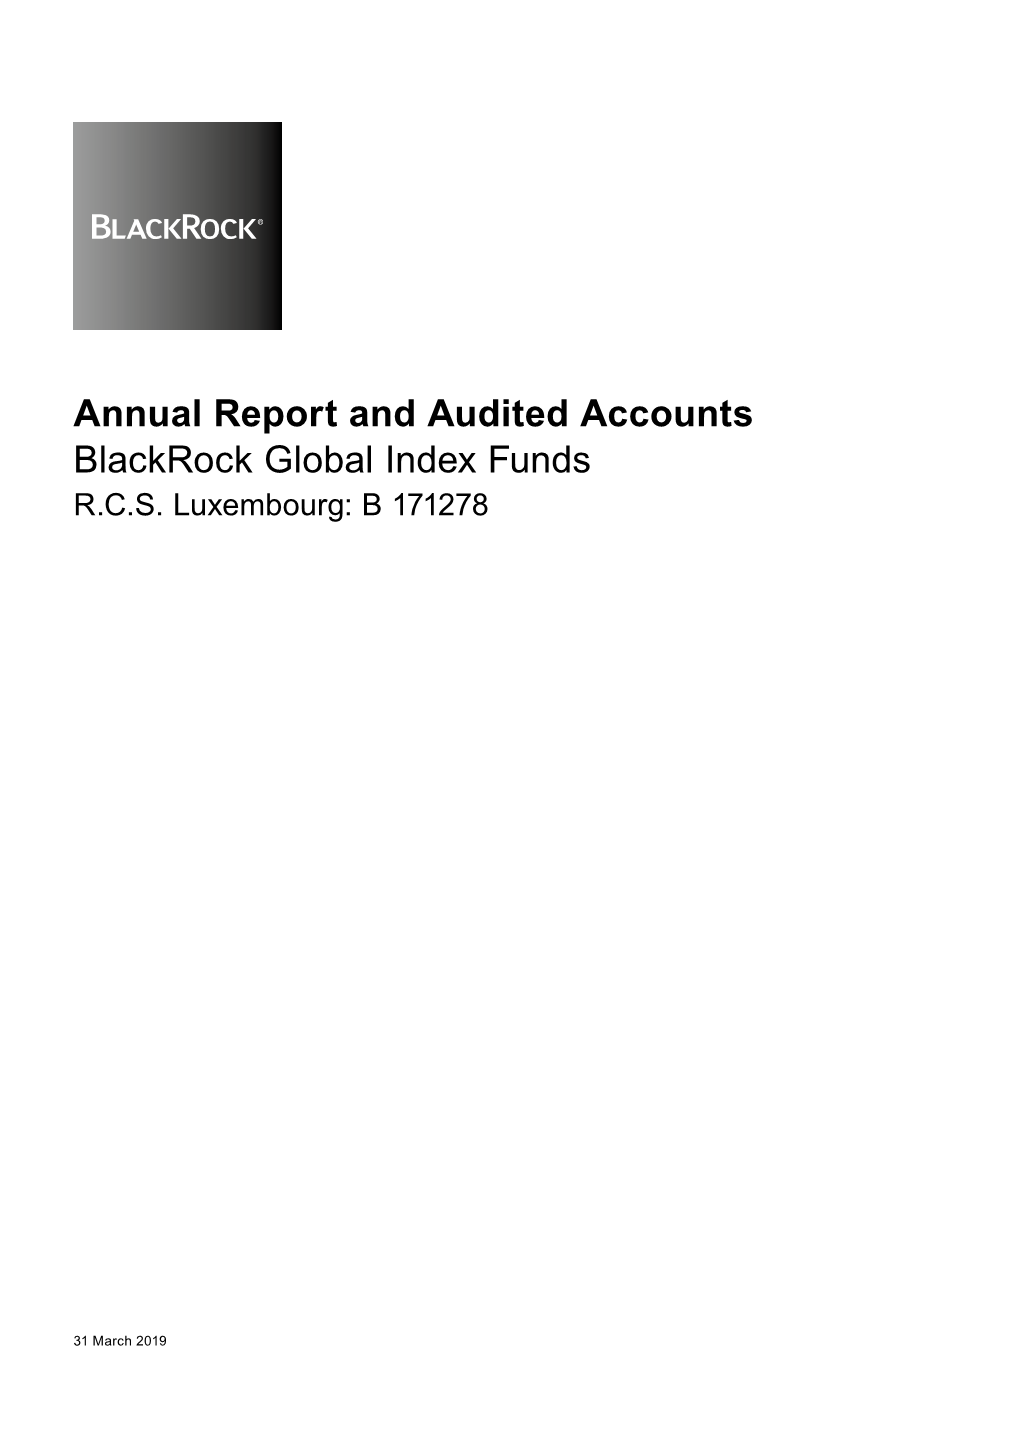 Blackrock Global Index Funds Annual Report and Audited Accounts 31